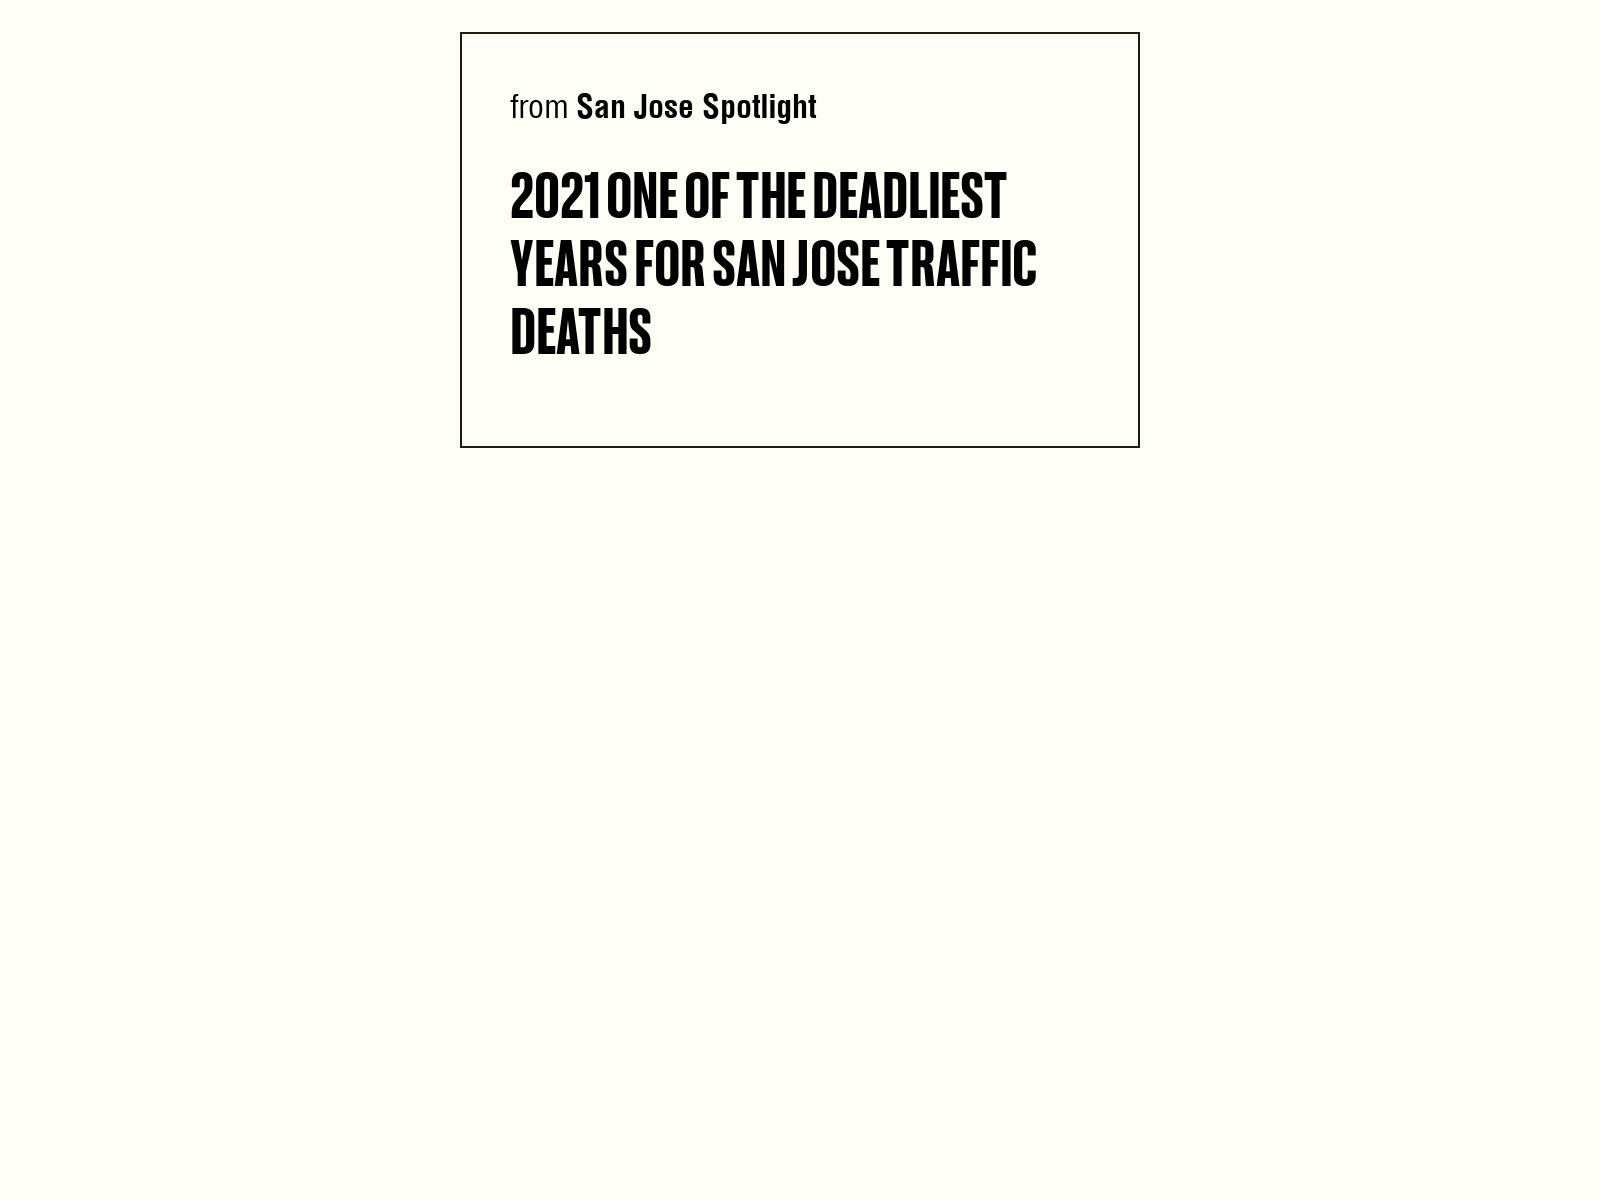 2021 one of the deadliest years for San Jose traffic deaths San